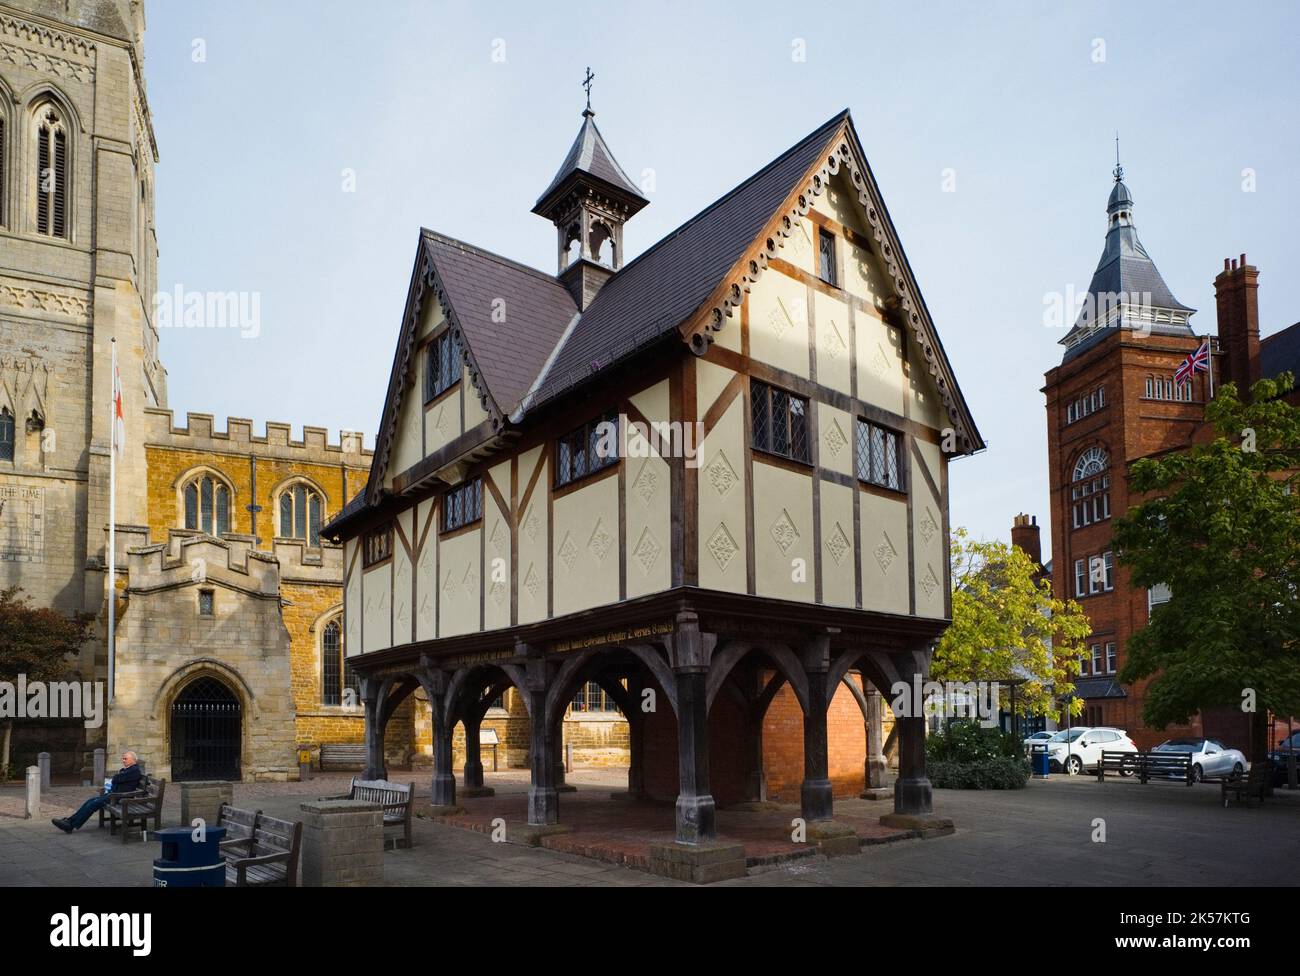 The Old Grammar School building in the centre of Market Harborough was built above the butter market in 1614 Stock Photo